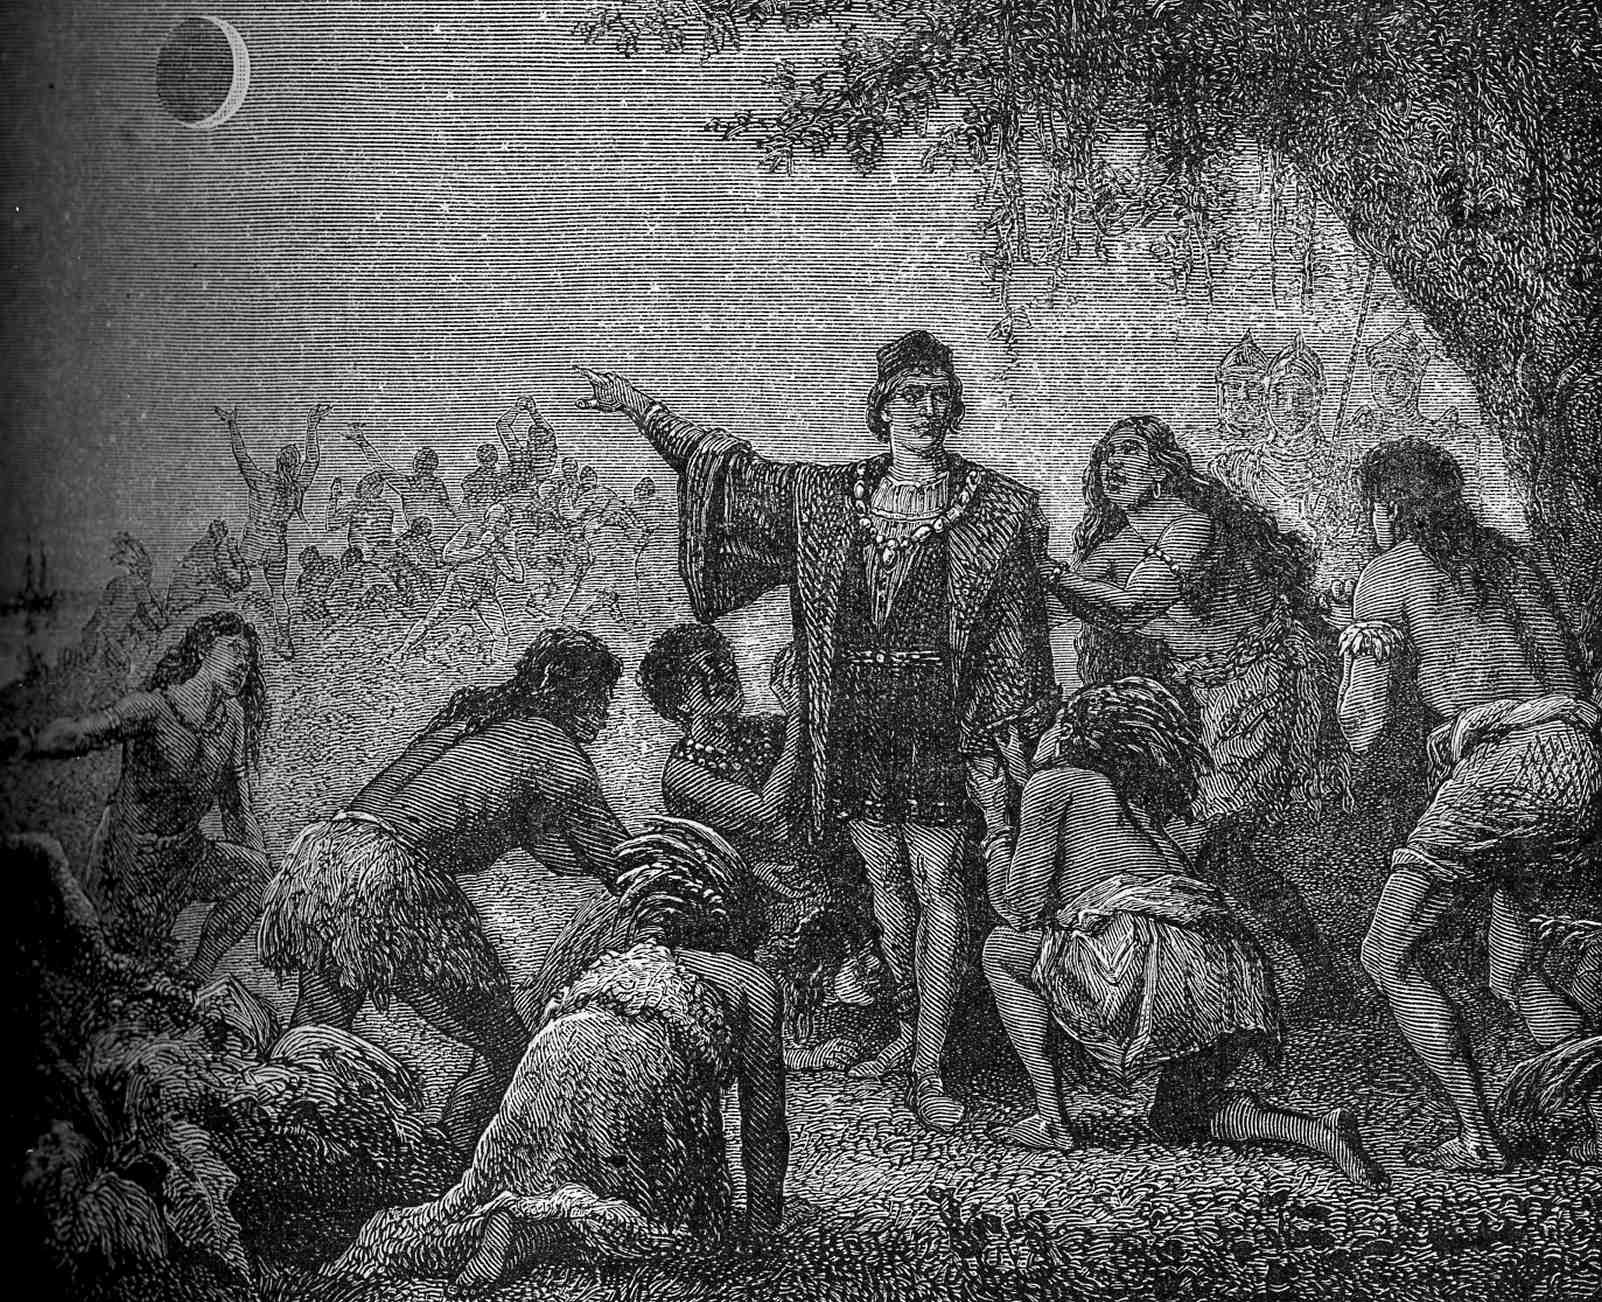 Columbus and the Eclipse